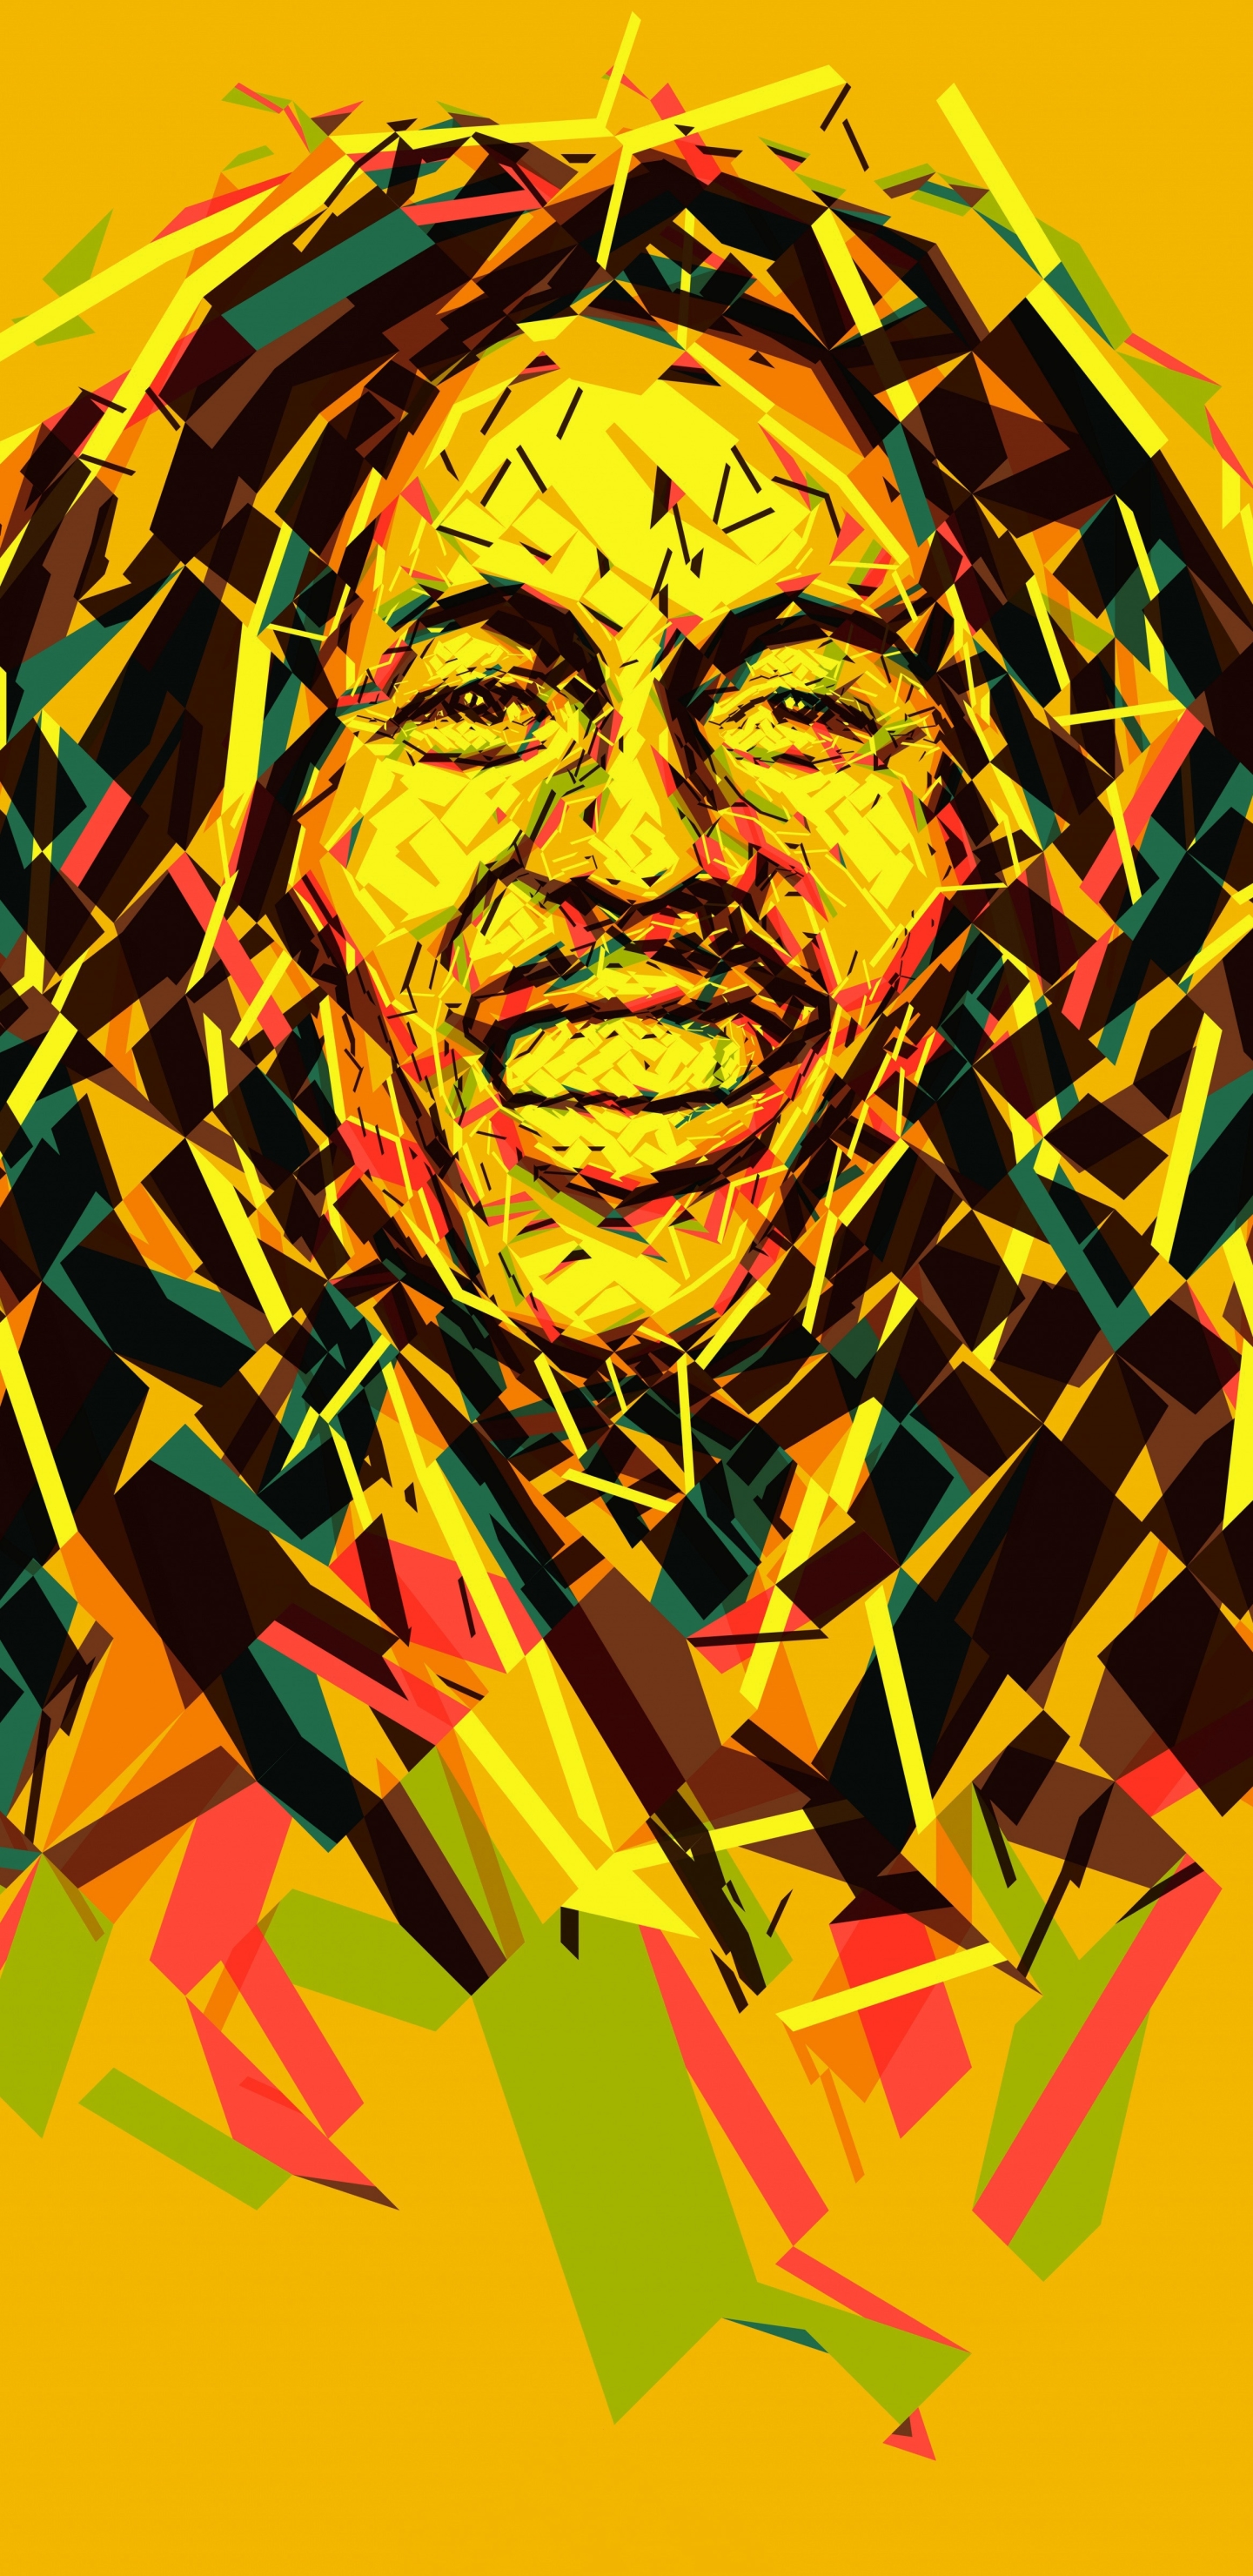 music, bob marley, colors, smile, face, singer, jamaican